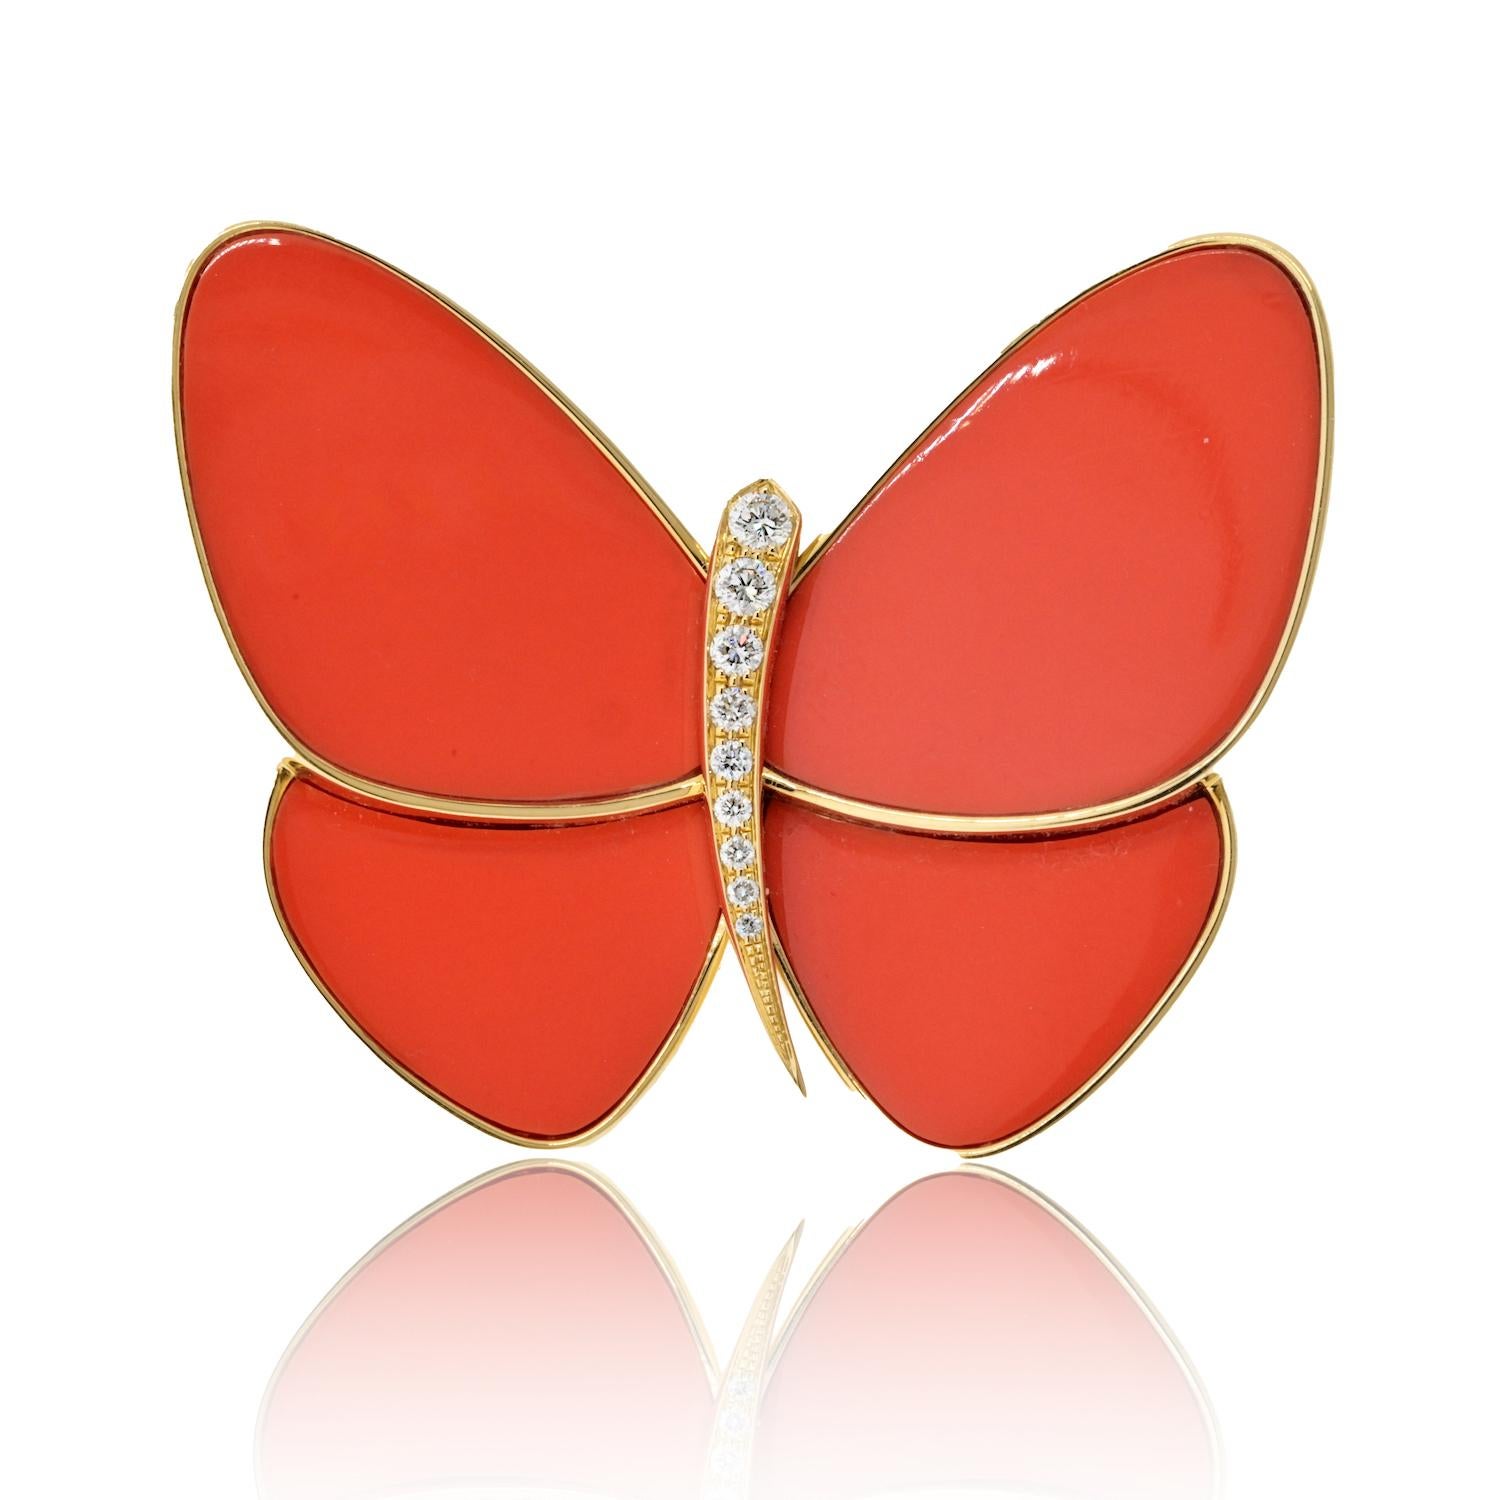 Van Cleef & Arpels presents a mesmerizing creation: a stylized butterfly adorned with exquisite coral inlaid wings. The wings, a rich opaque medium reddish-orange hue, captivate the eye with their vibrant color. At the heart of this enchanting